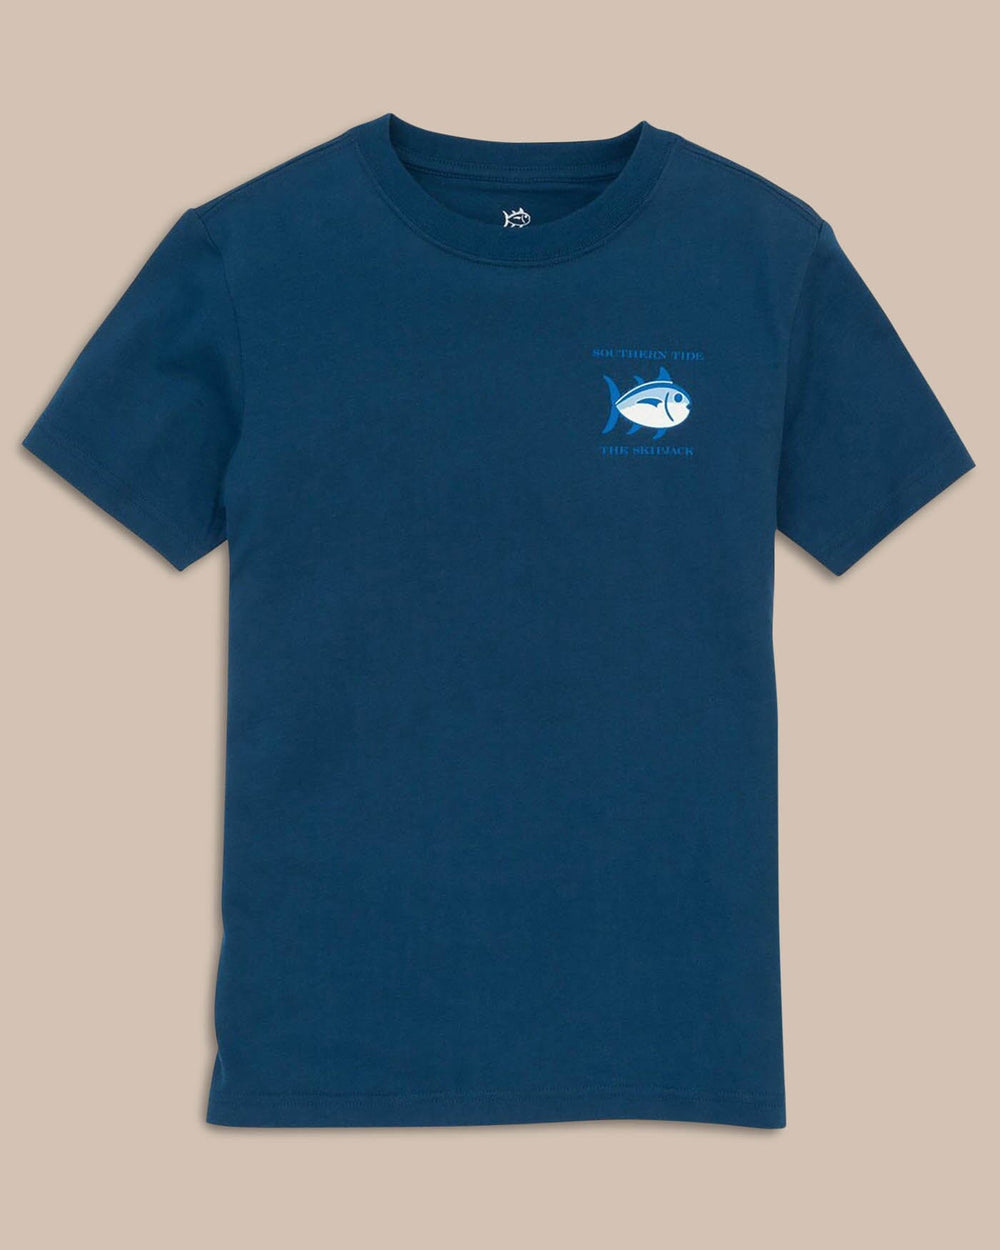 The front view of the Kid's Navy Original Skipjack T-Shirt by Southern Tide - Yacht Blue